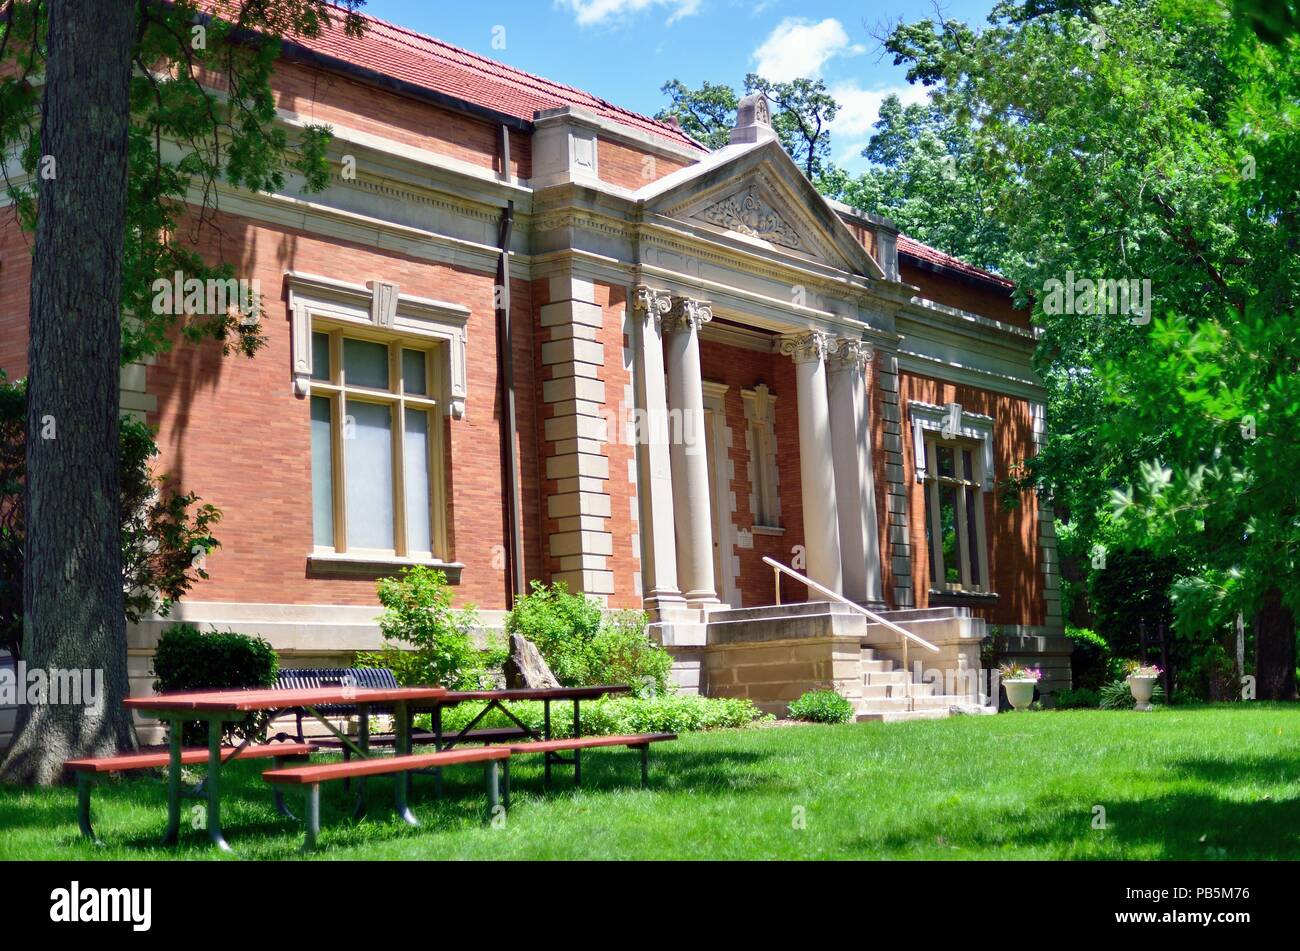 Elgin, Illinois, USA. The Elgin Public Museum or  Elgin Public Museum of Natural History and Anthropology located in Lords Park. Stock Photo